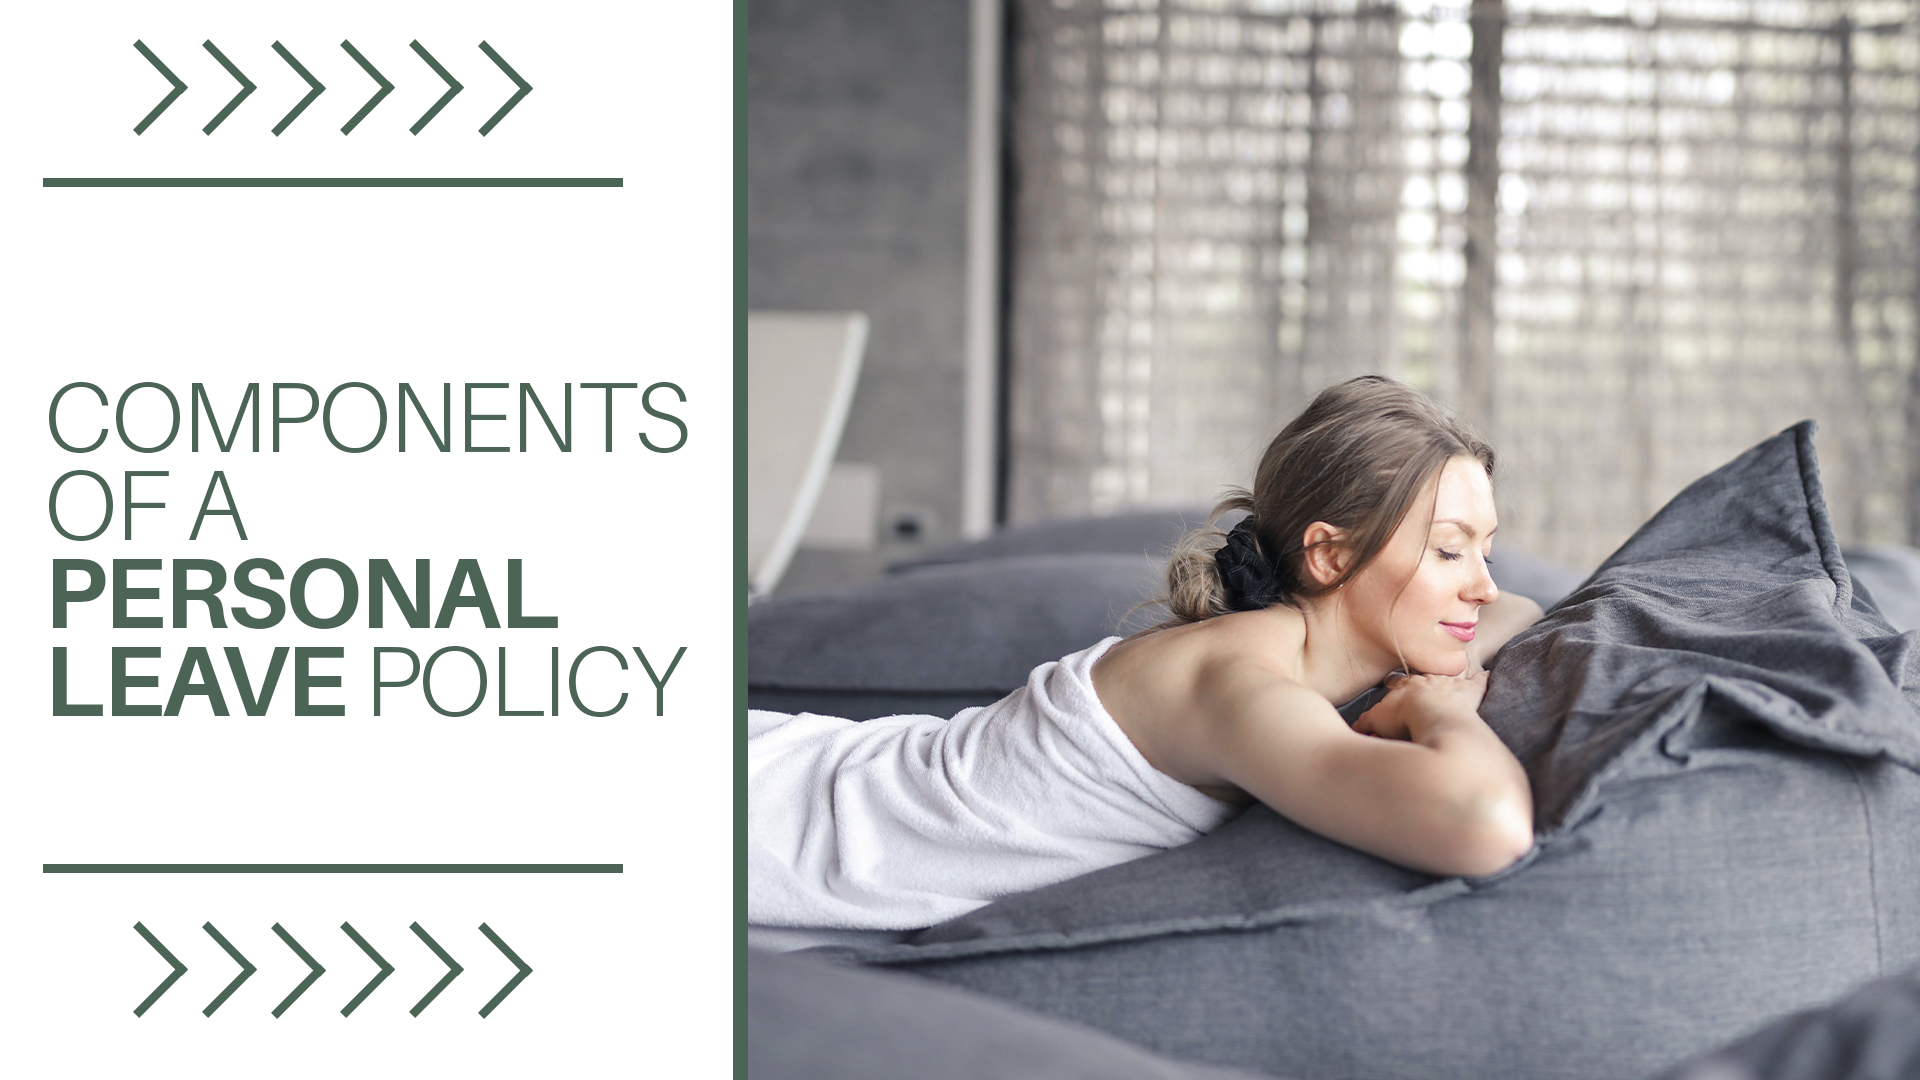 Components of a Personal Leave Policy